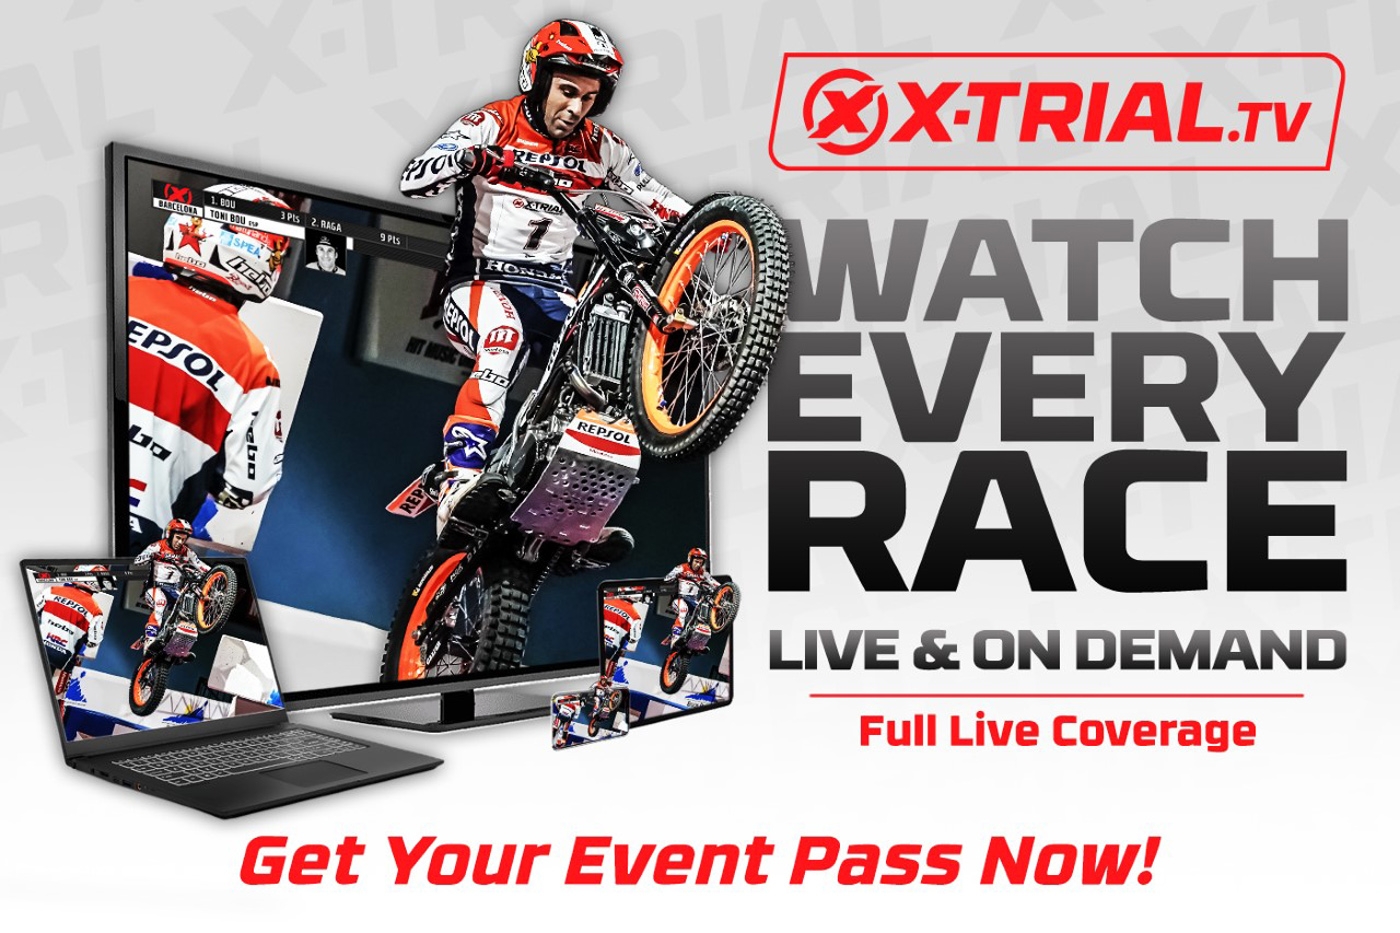 Follow X-Trial live with the x-trial.tv Event Pass